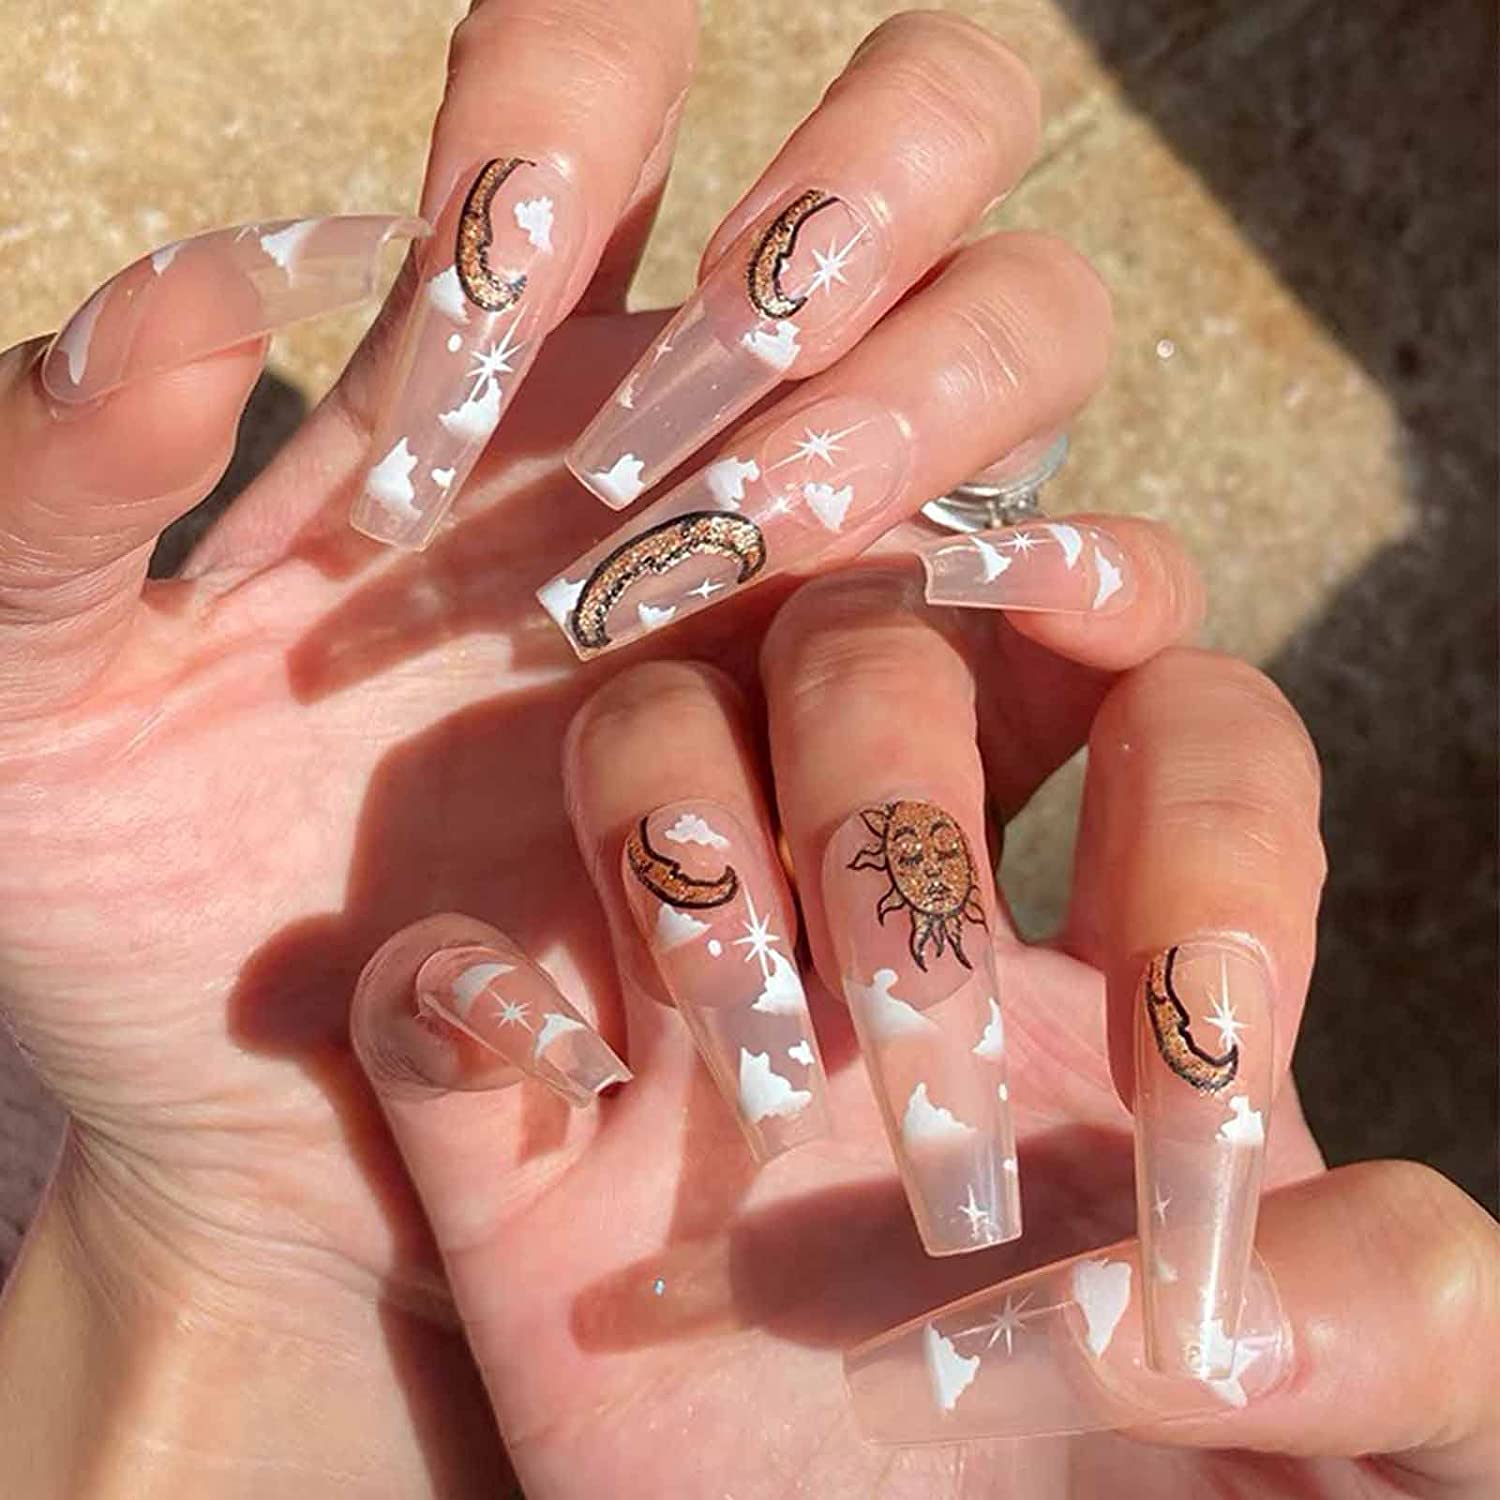 24 Nail Ideas for Fall That Are Far From Basic